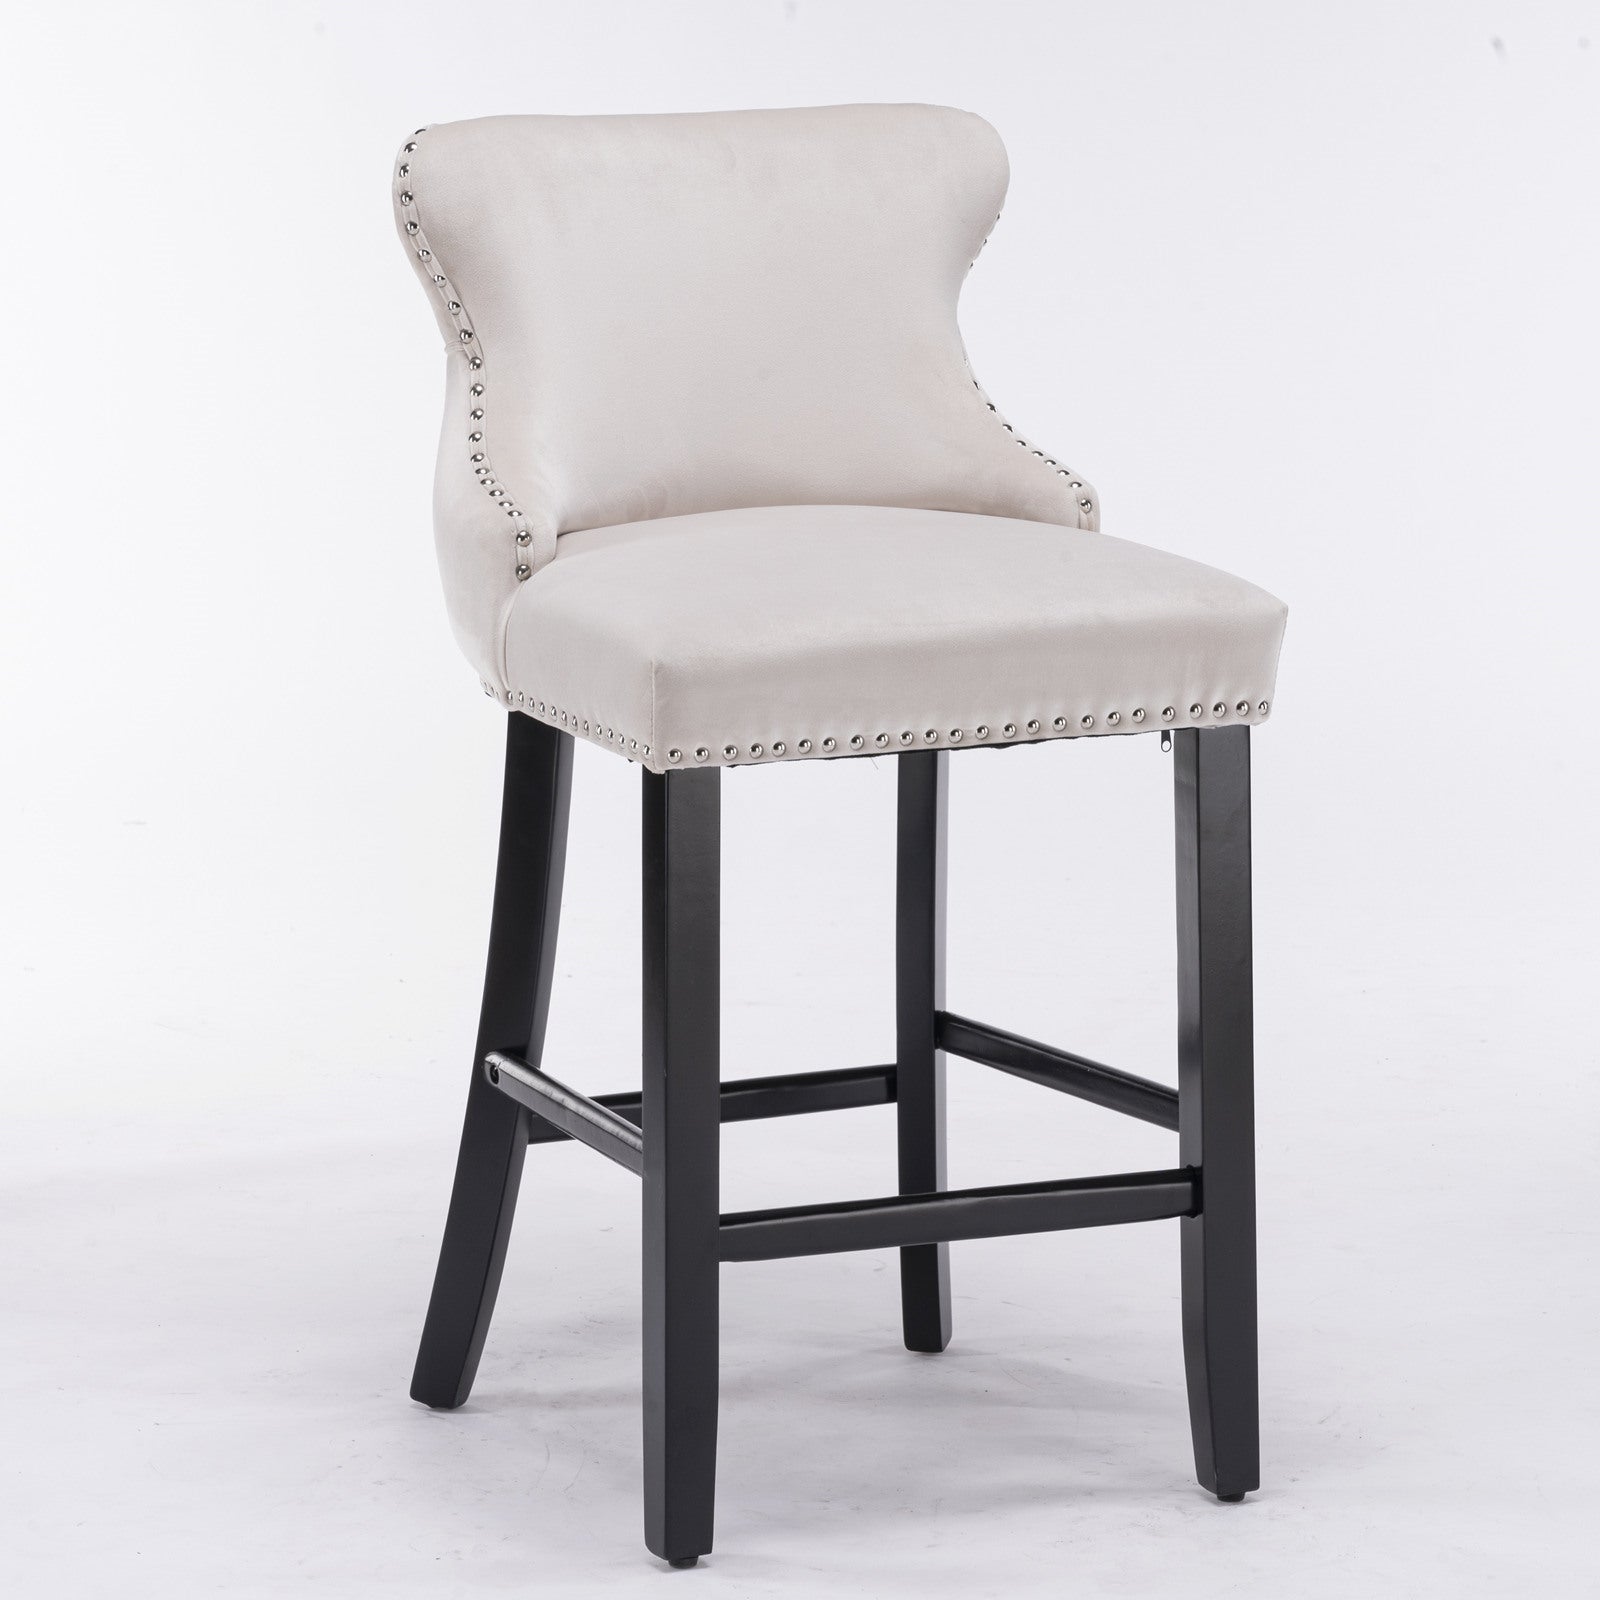 Set of 2 Beige Velvet Counter Height Stools with Tufted Back and Nailhead Trim